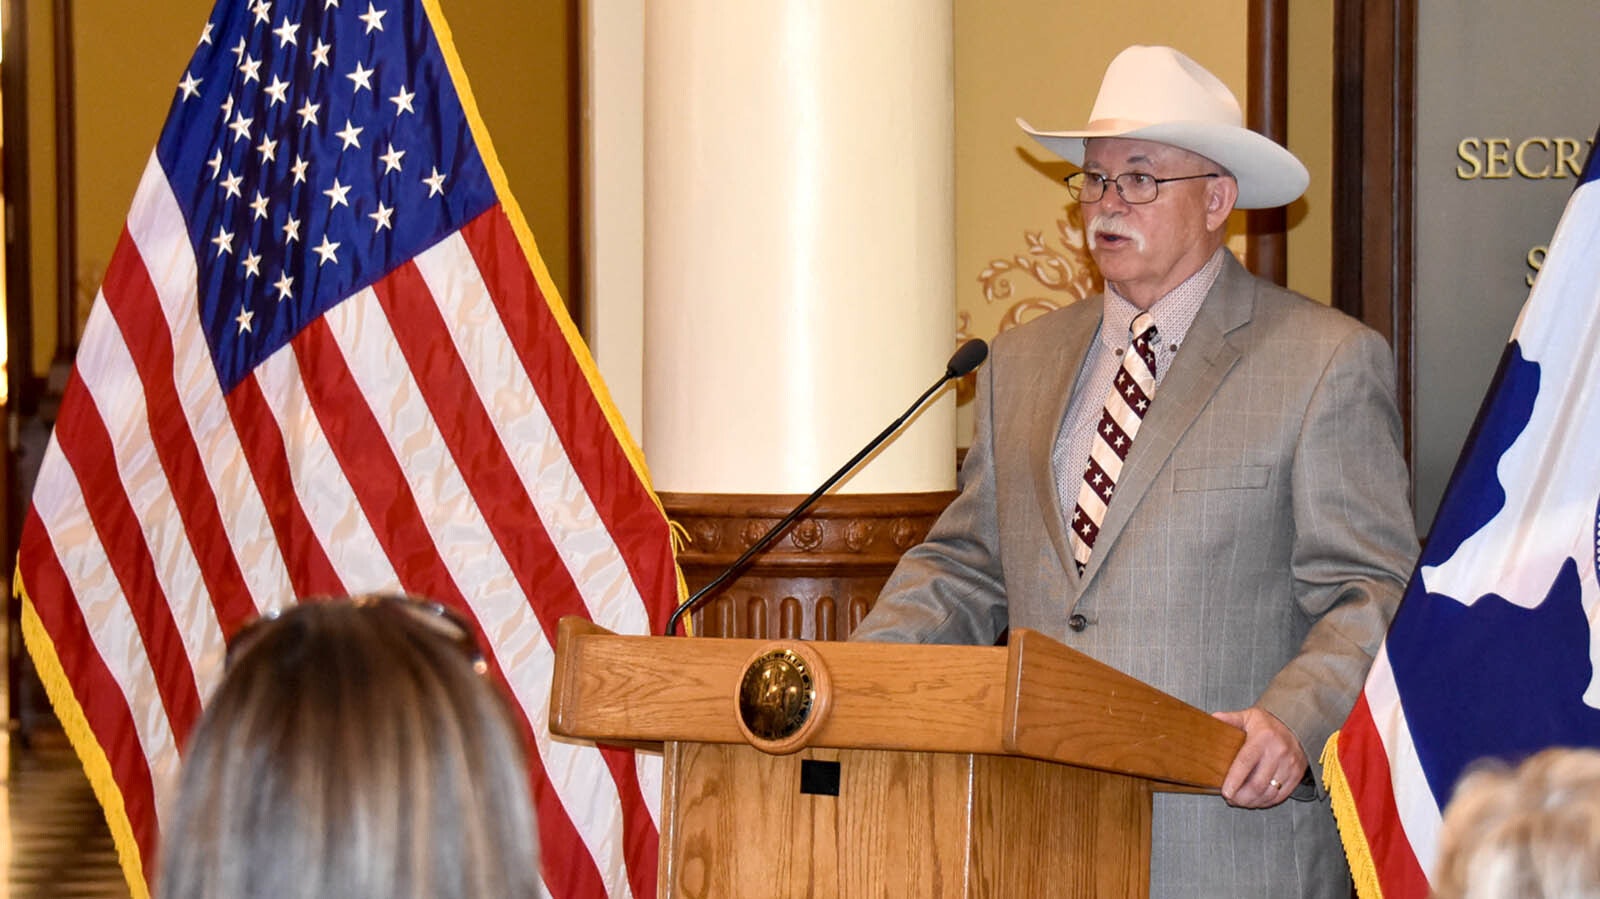 Former Fremont County Sheriff Skip Hornecker was inducted into the Wyoming Law Enforcement Hall of Fame last week at the Capitol in Cheyenne.